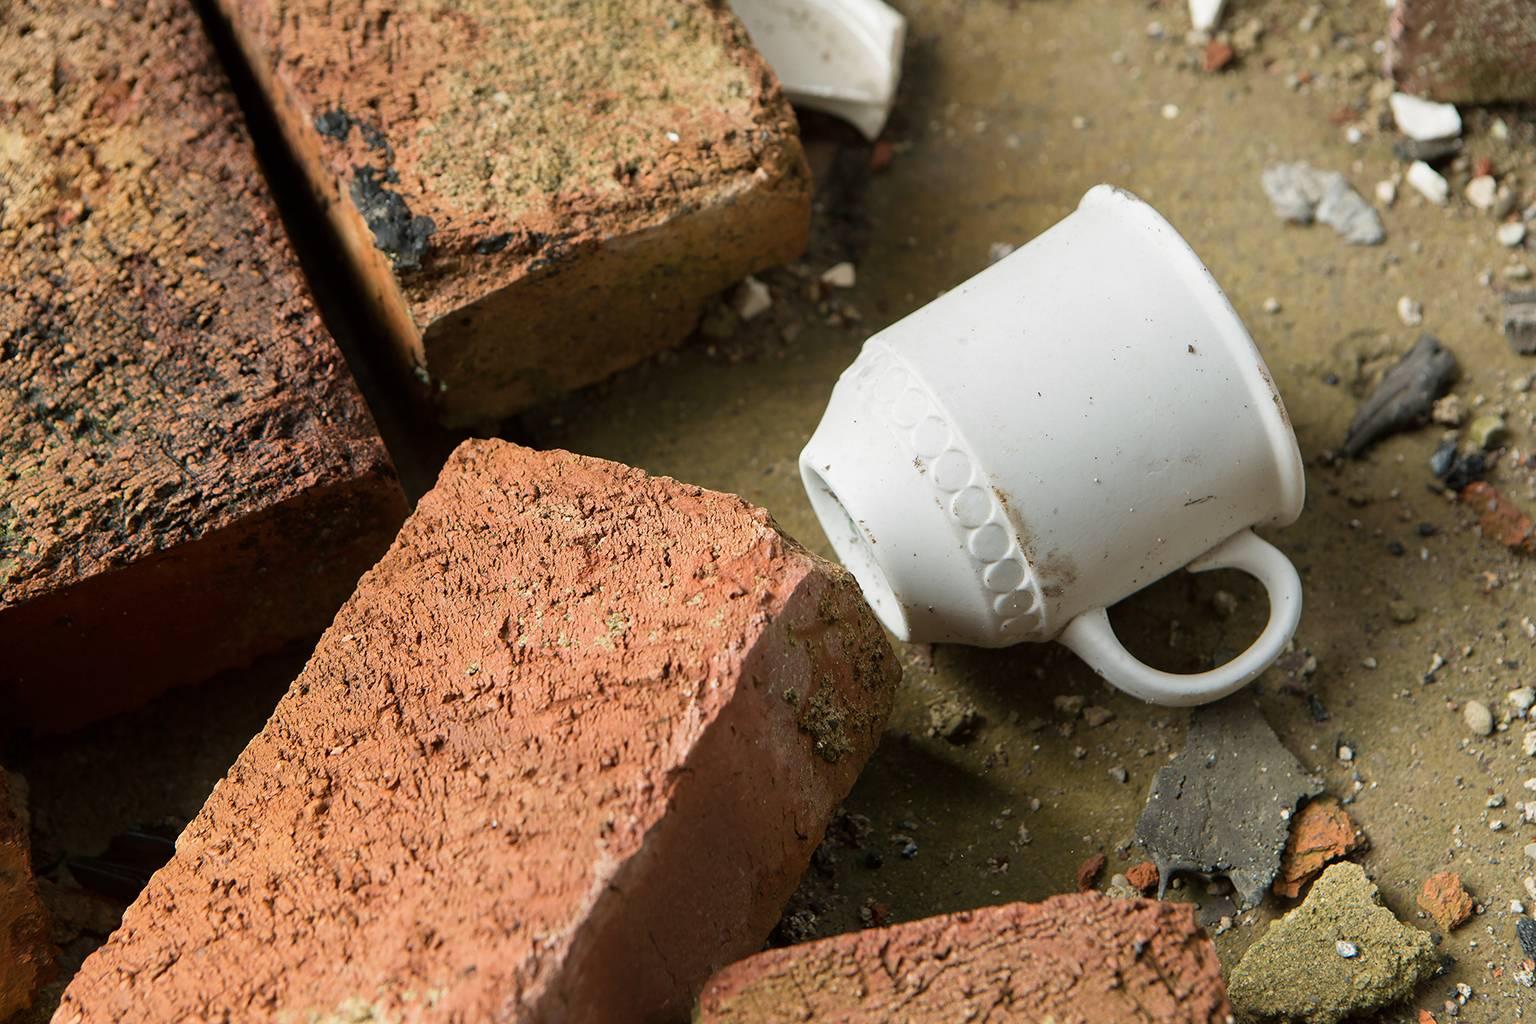 Rebecca Skinner Color Photograph - "Fallen", contemporary, abandoned, factory, cup, brick, white, red, color photo